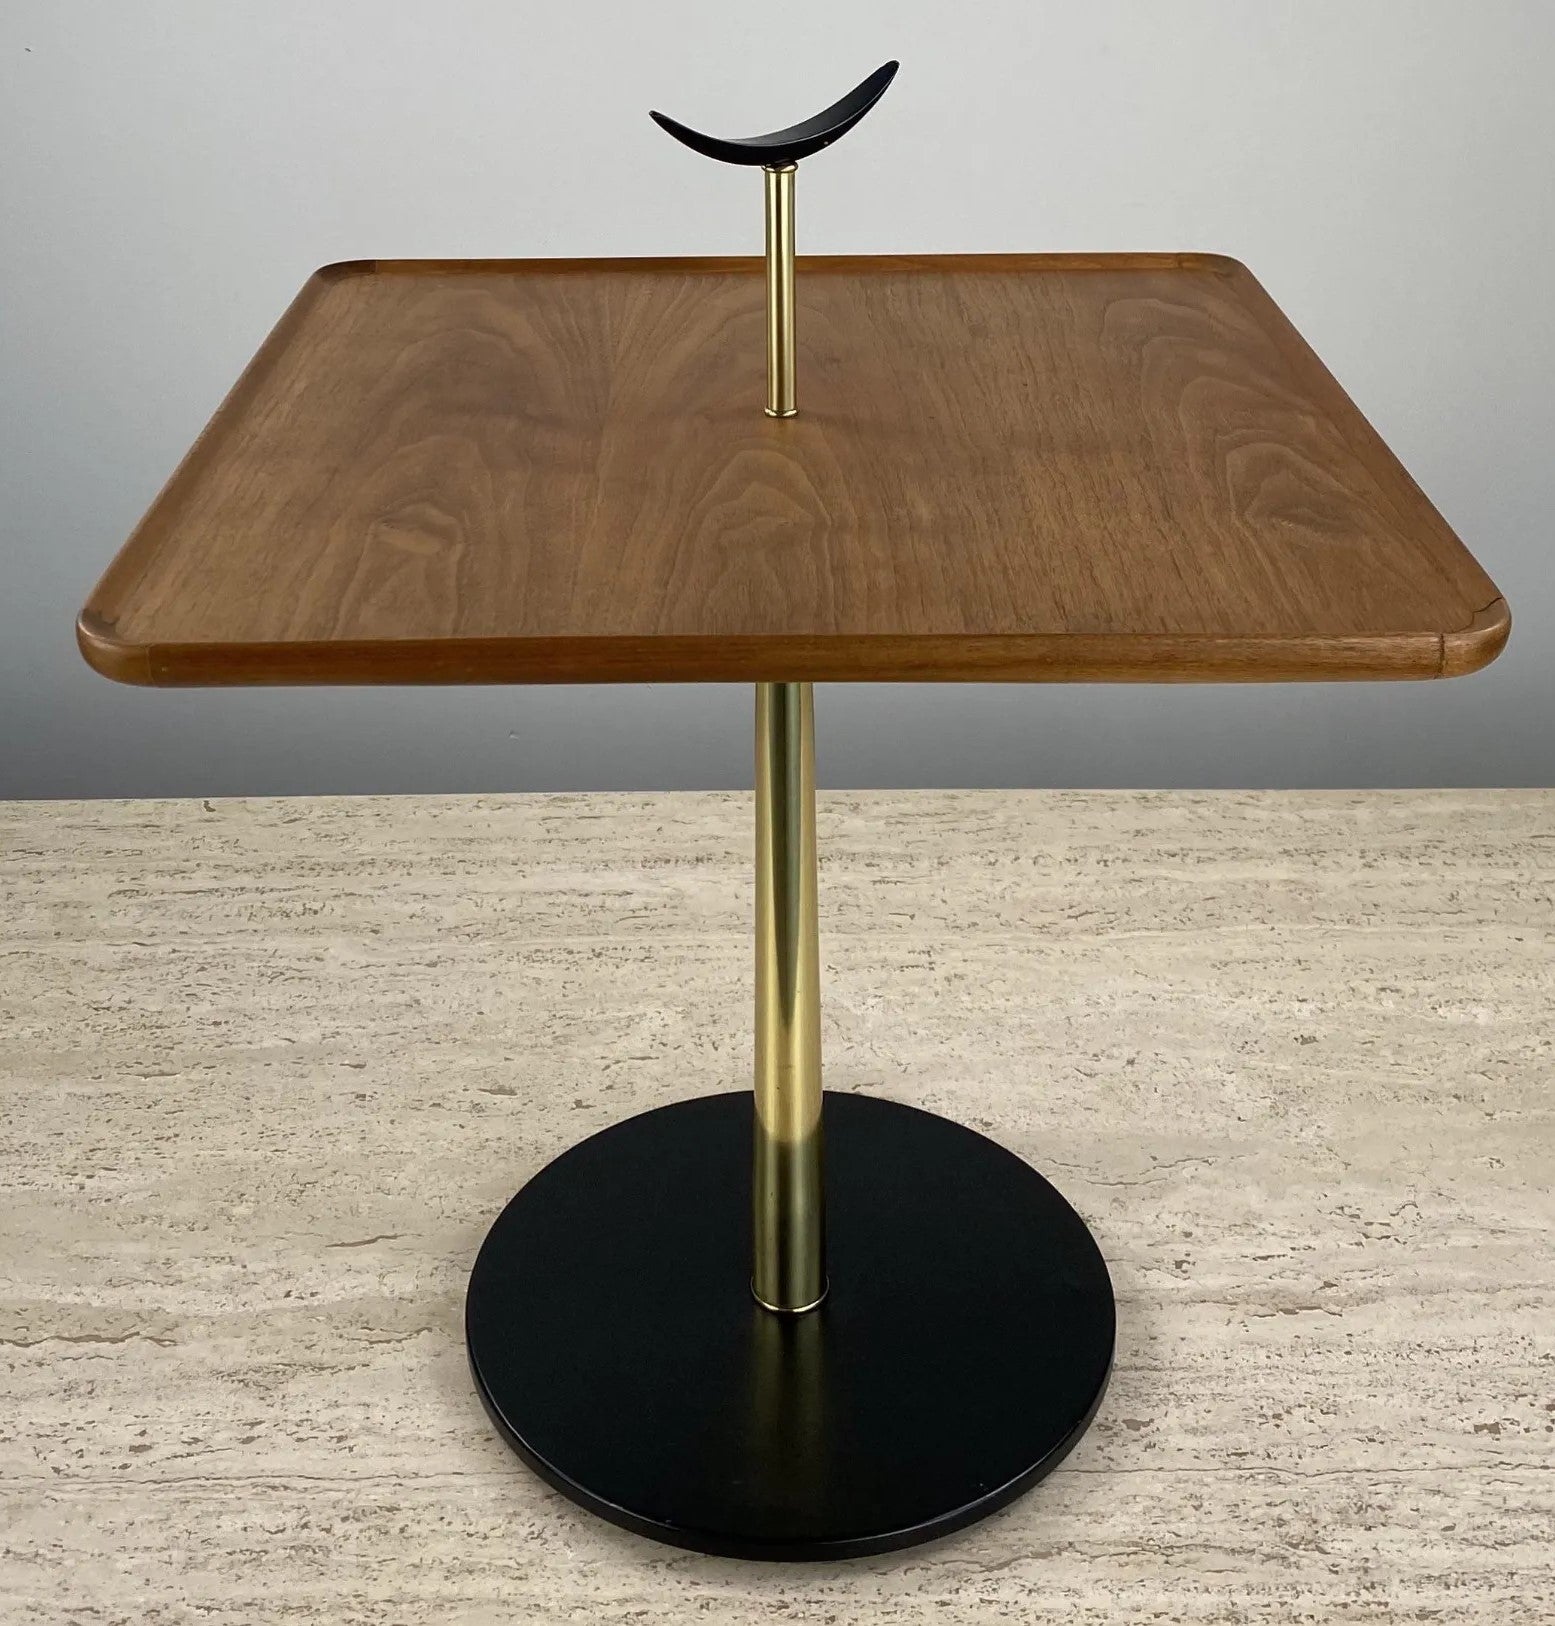 Milo Baughman for Arch Gordon side table. The table has an enameled crescent shaped handle, a walnut square top, brass stem and a black enameled metal round base. 
Measures: 23.5